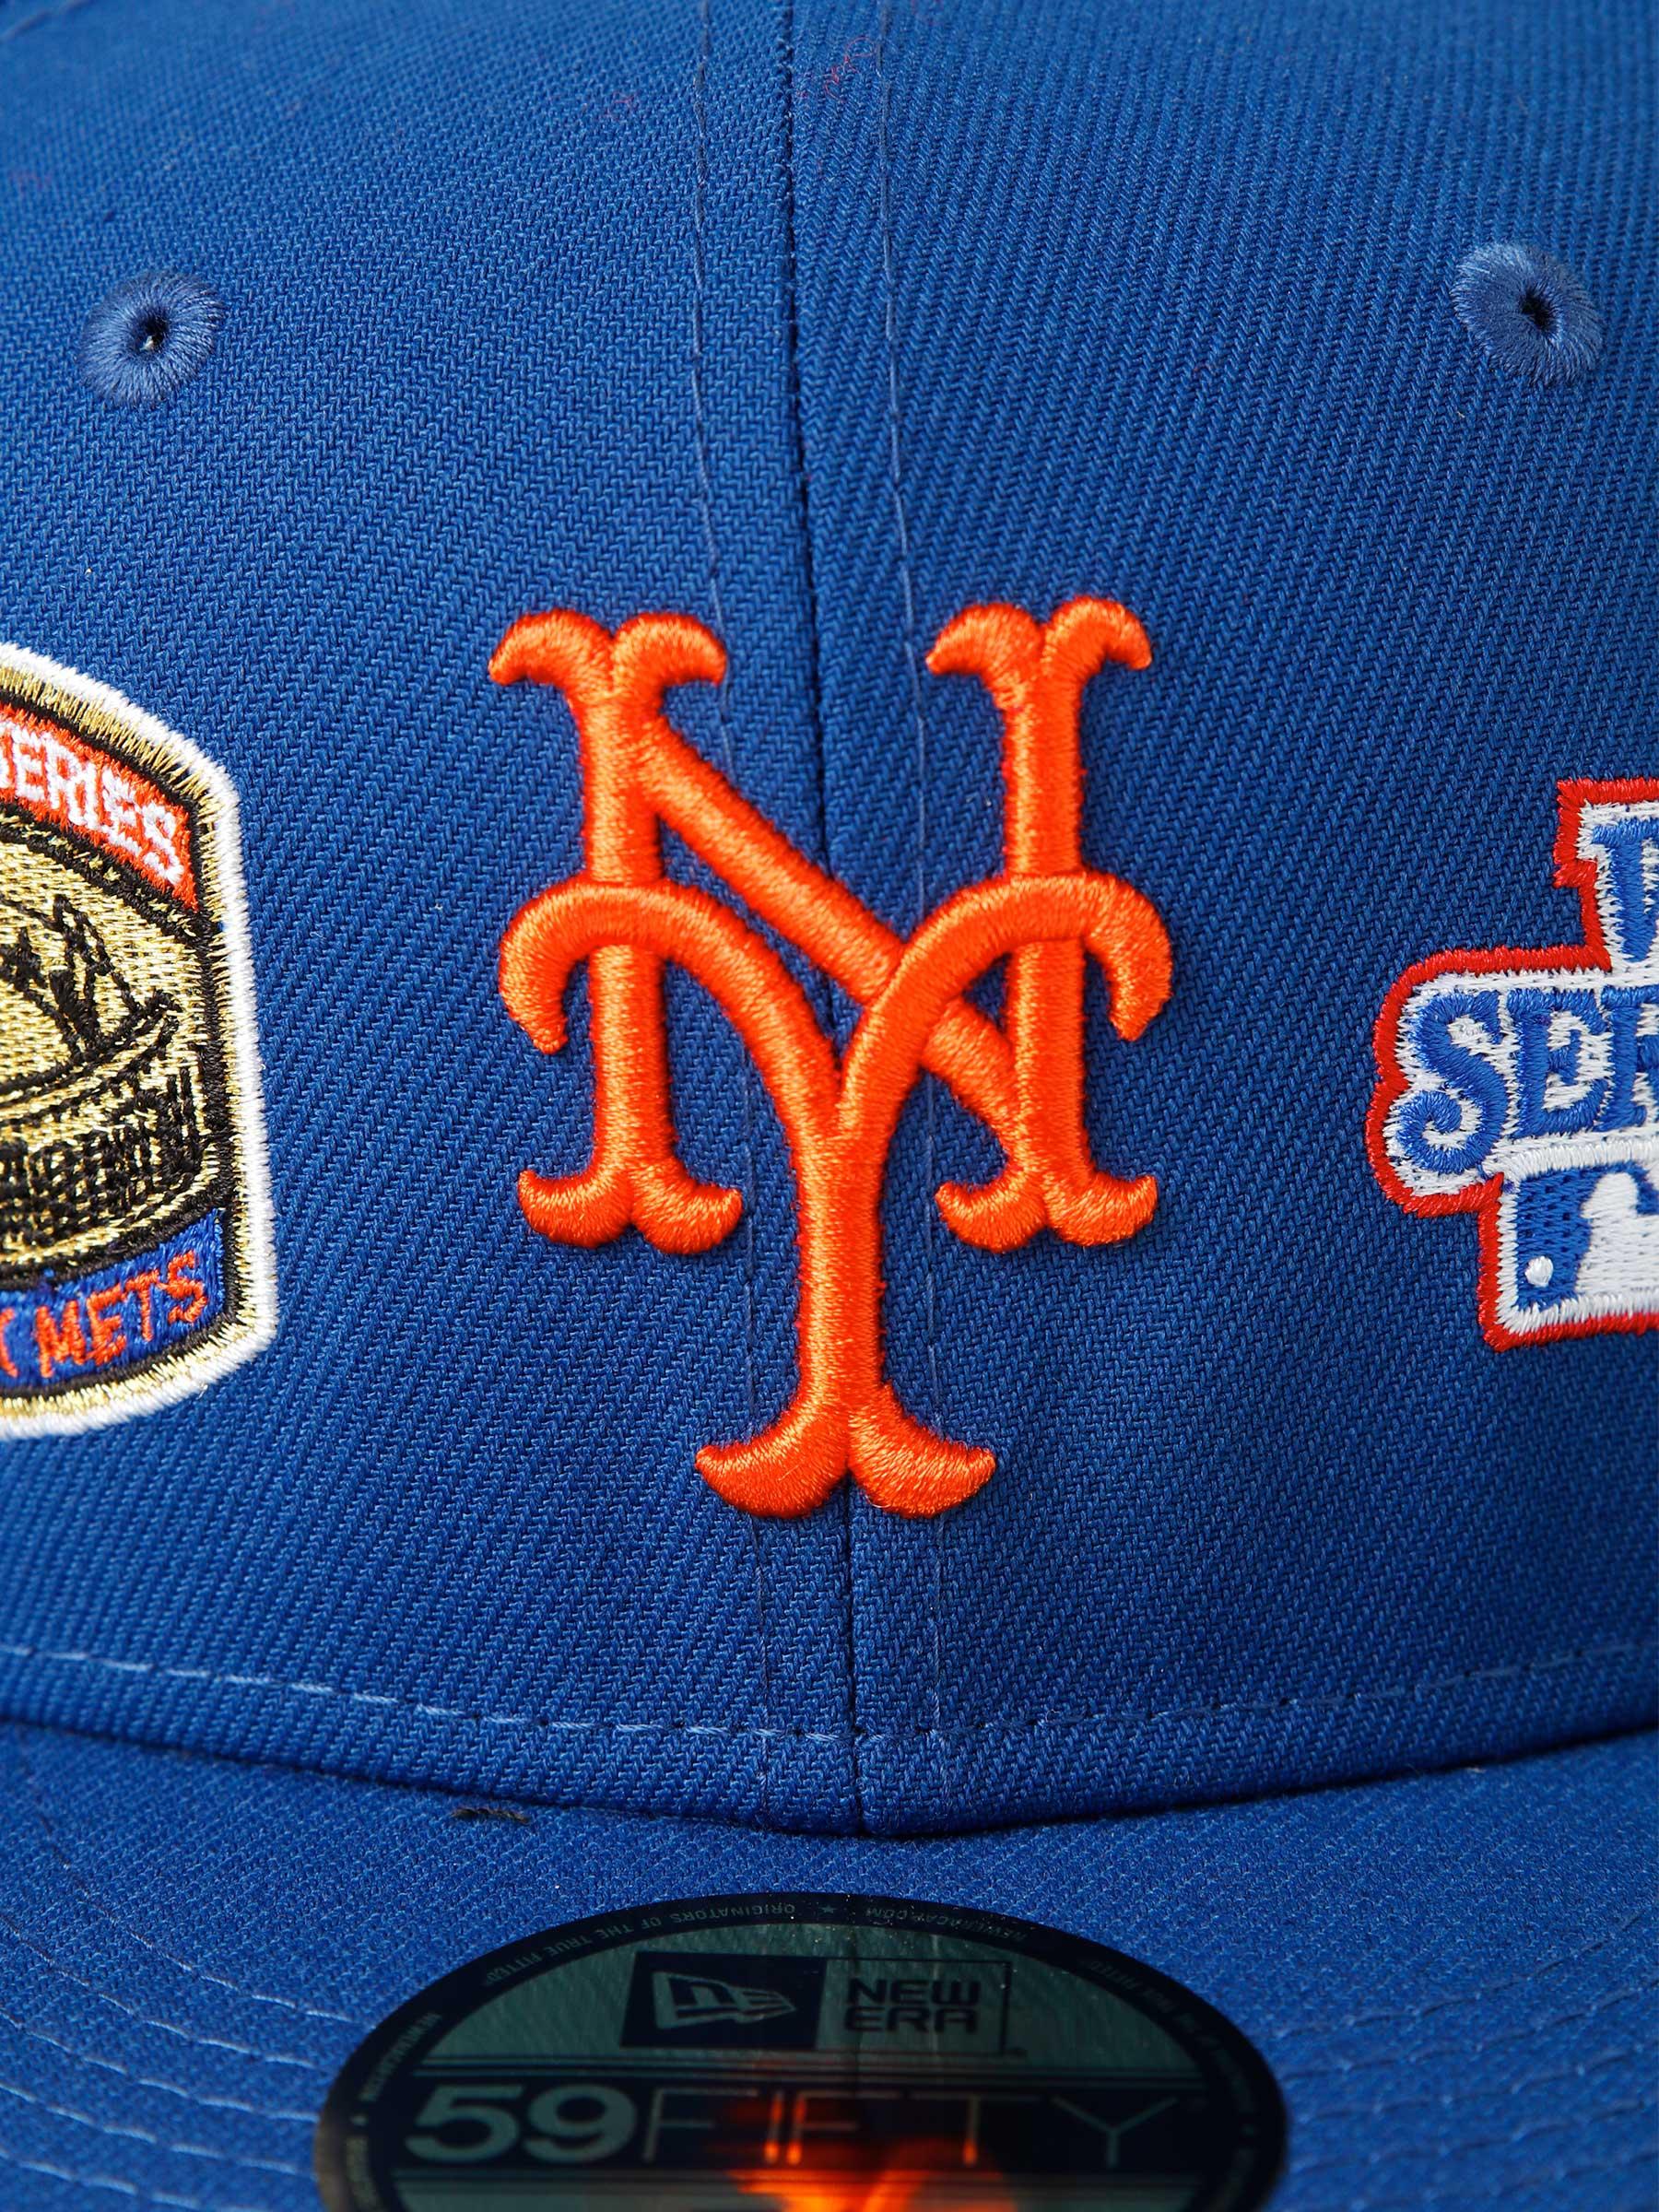 59Fifty Historic Champs 12471 New York Mets 60288305